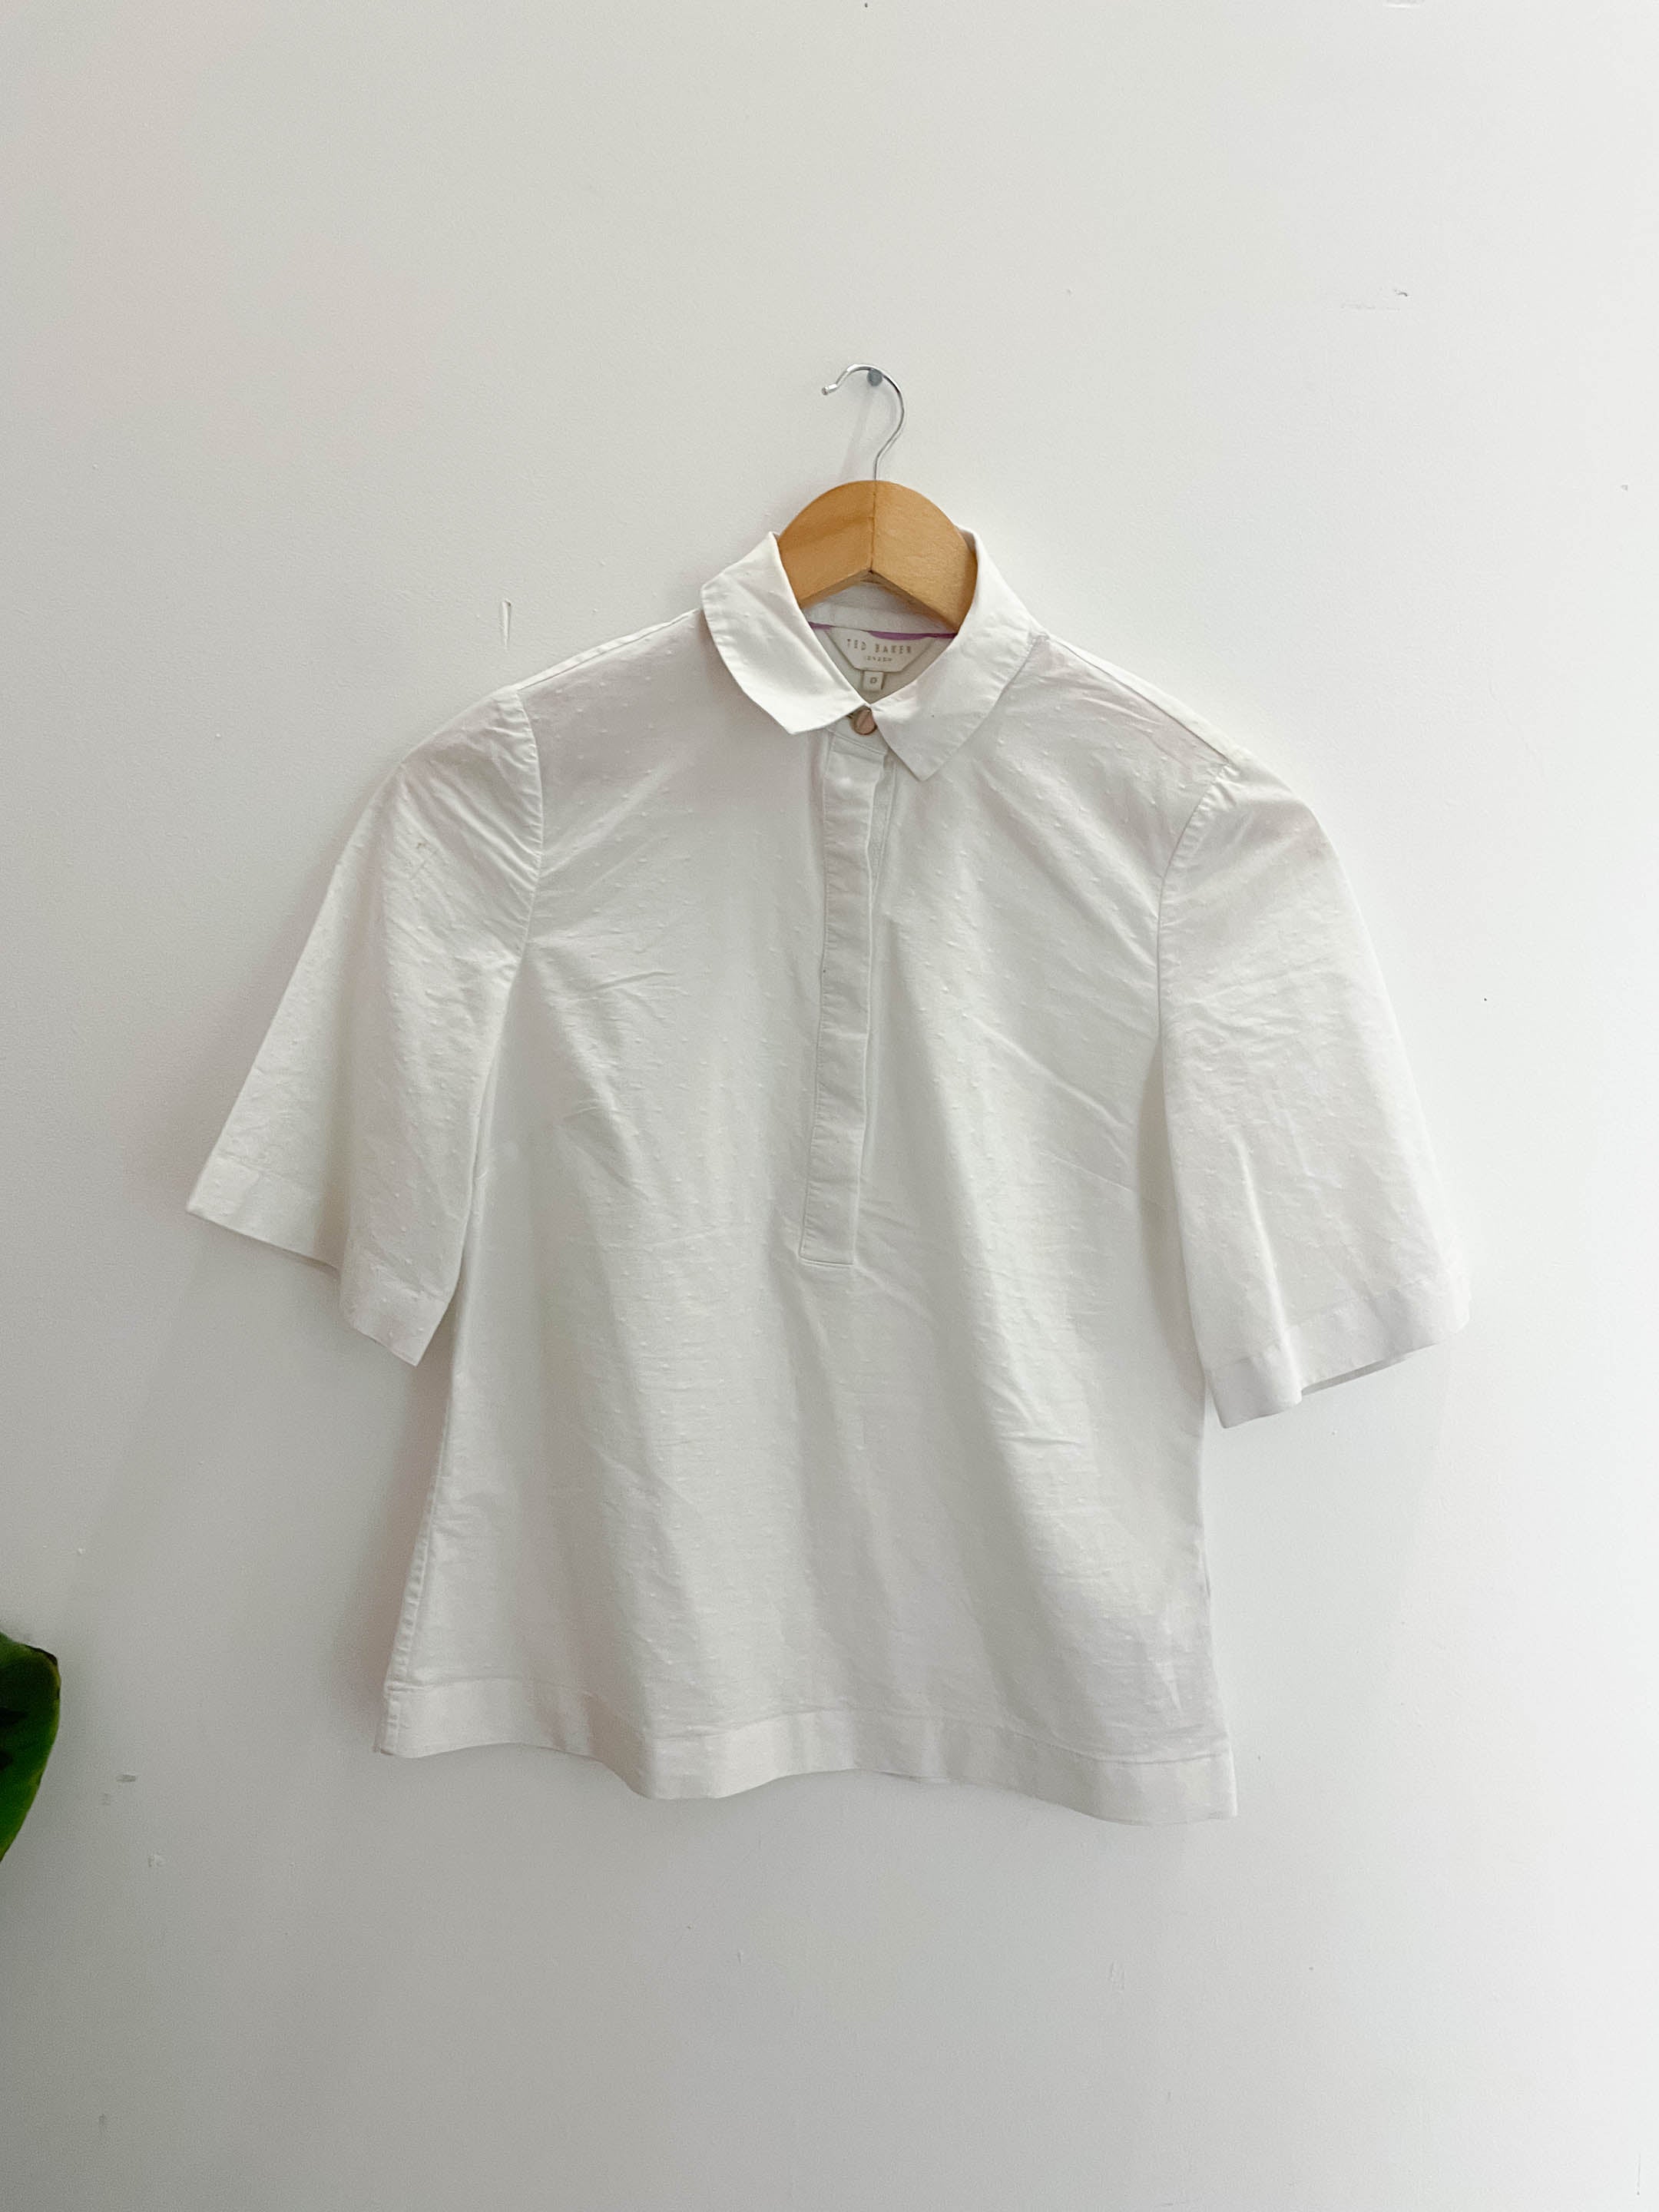 Vintage white ted baker small polo shirt